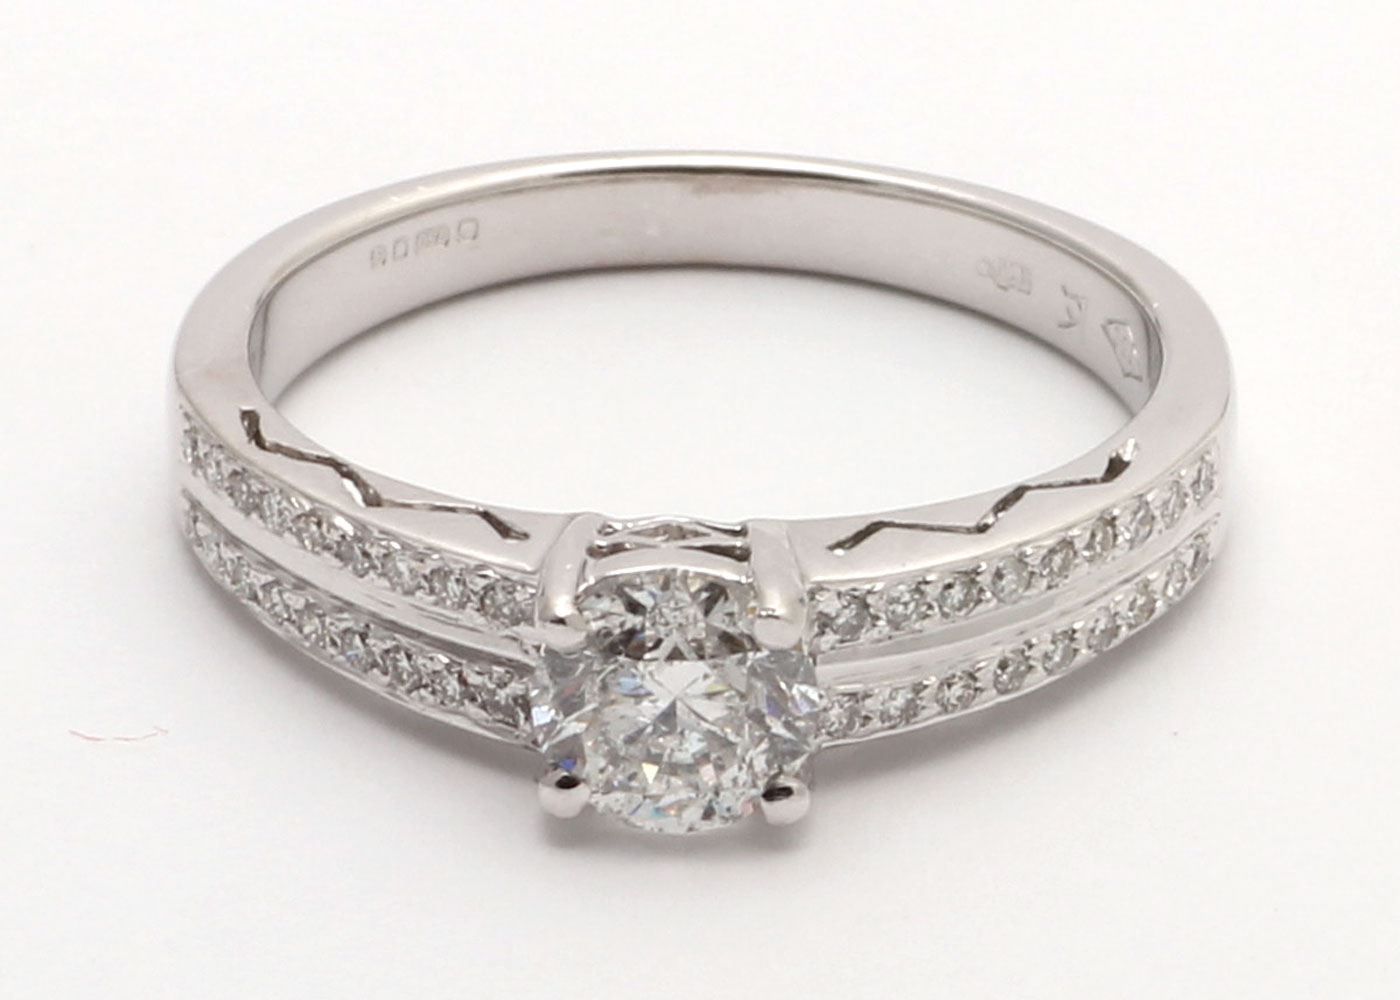 18ct White Gold Single Stone Diamond Ring With Double Chanel Set Shoulders (0.70) 0.83 Carats - Image 5 of 6